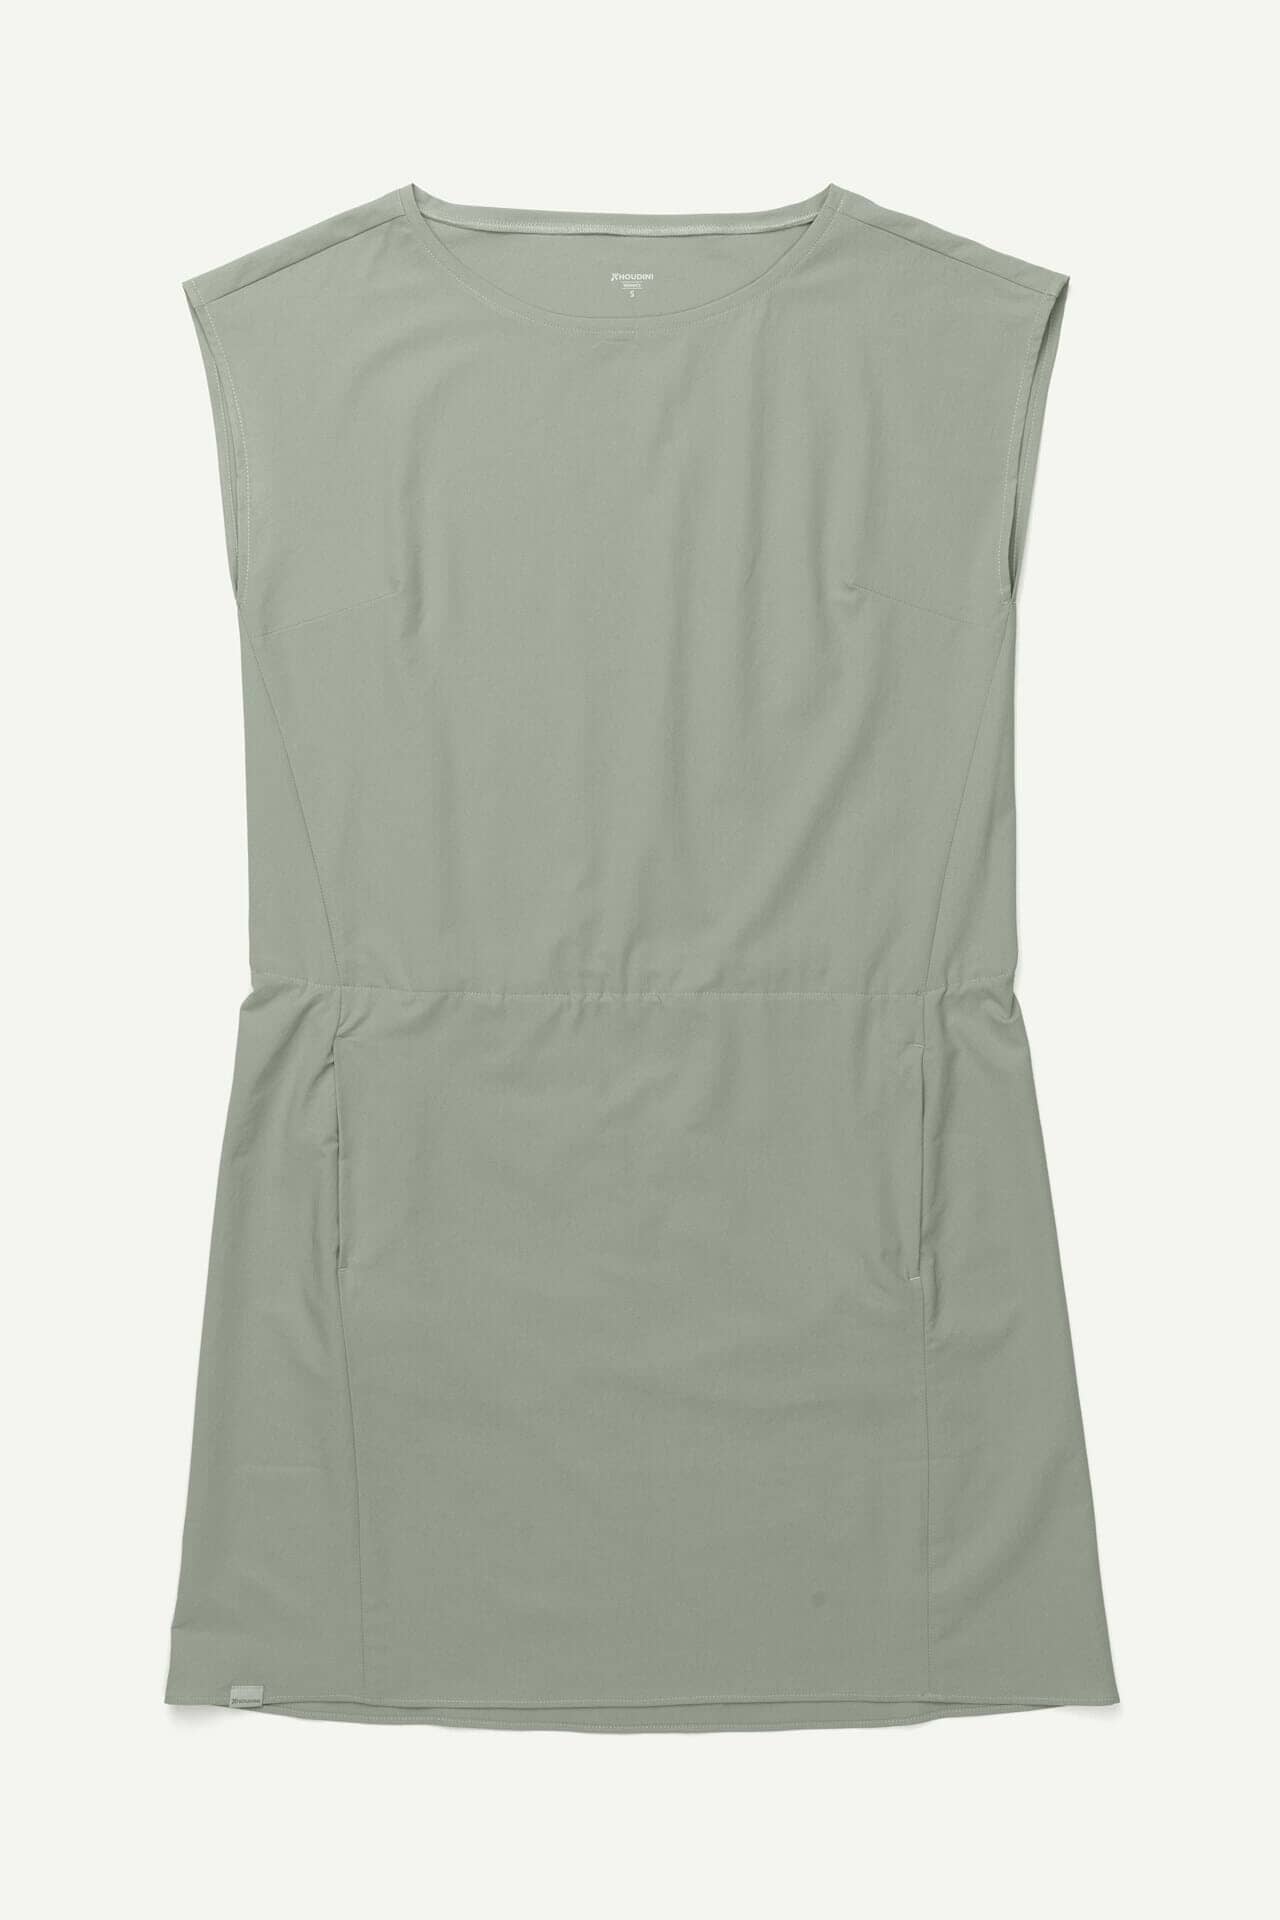 Houdini W's Dawn Dress - Recycled Polyester Frost Green Dress